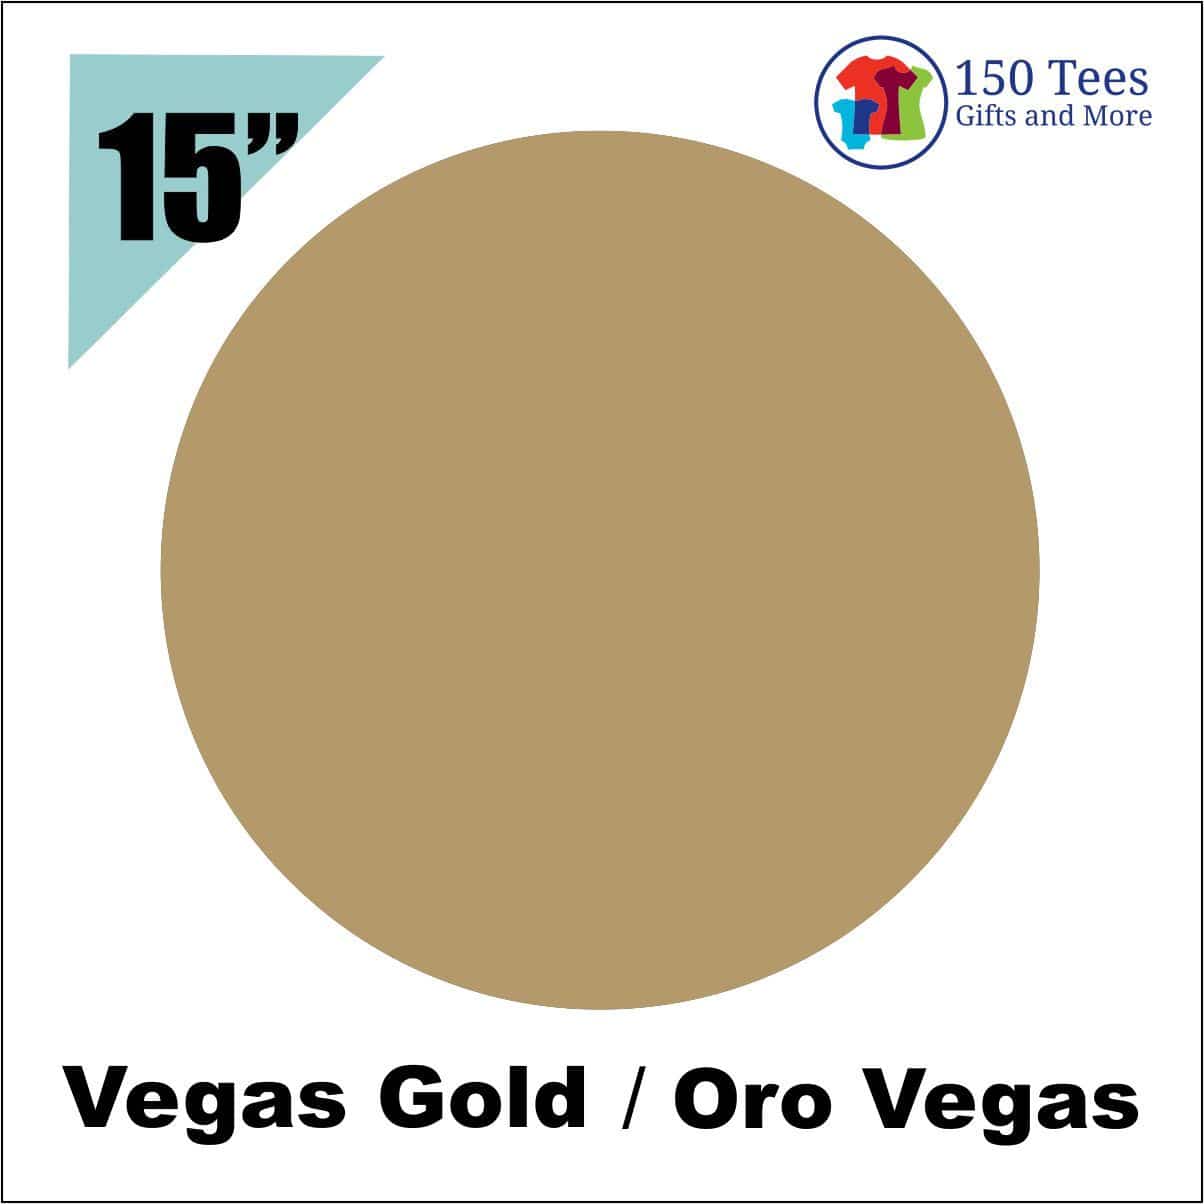 EasyWeed HTV 15" - Vegas Gold - 150 TEES GIFTS & MORE